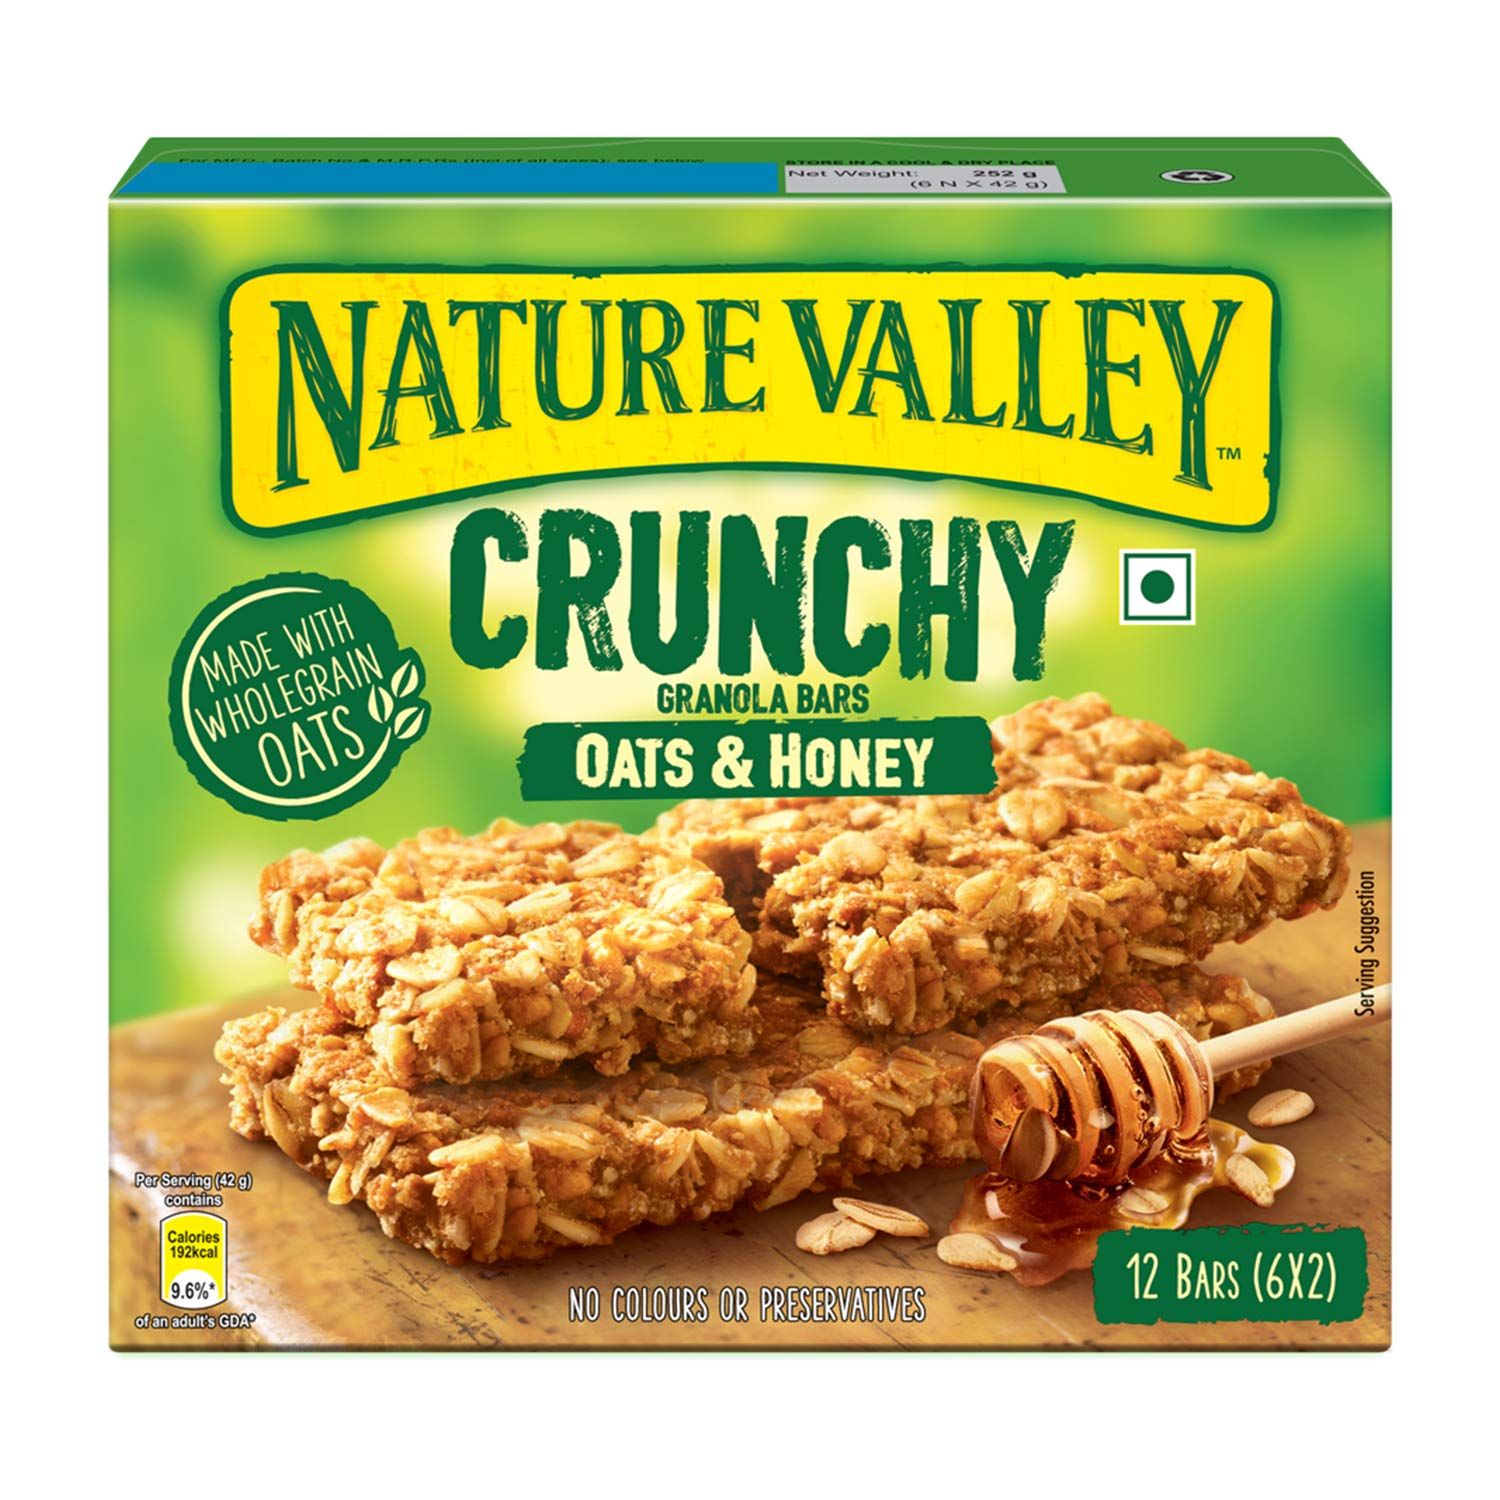 Nature Valley Crunchy Oats & Honey Image